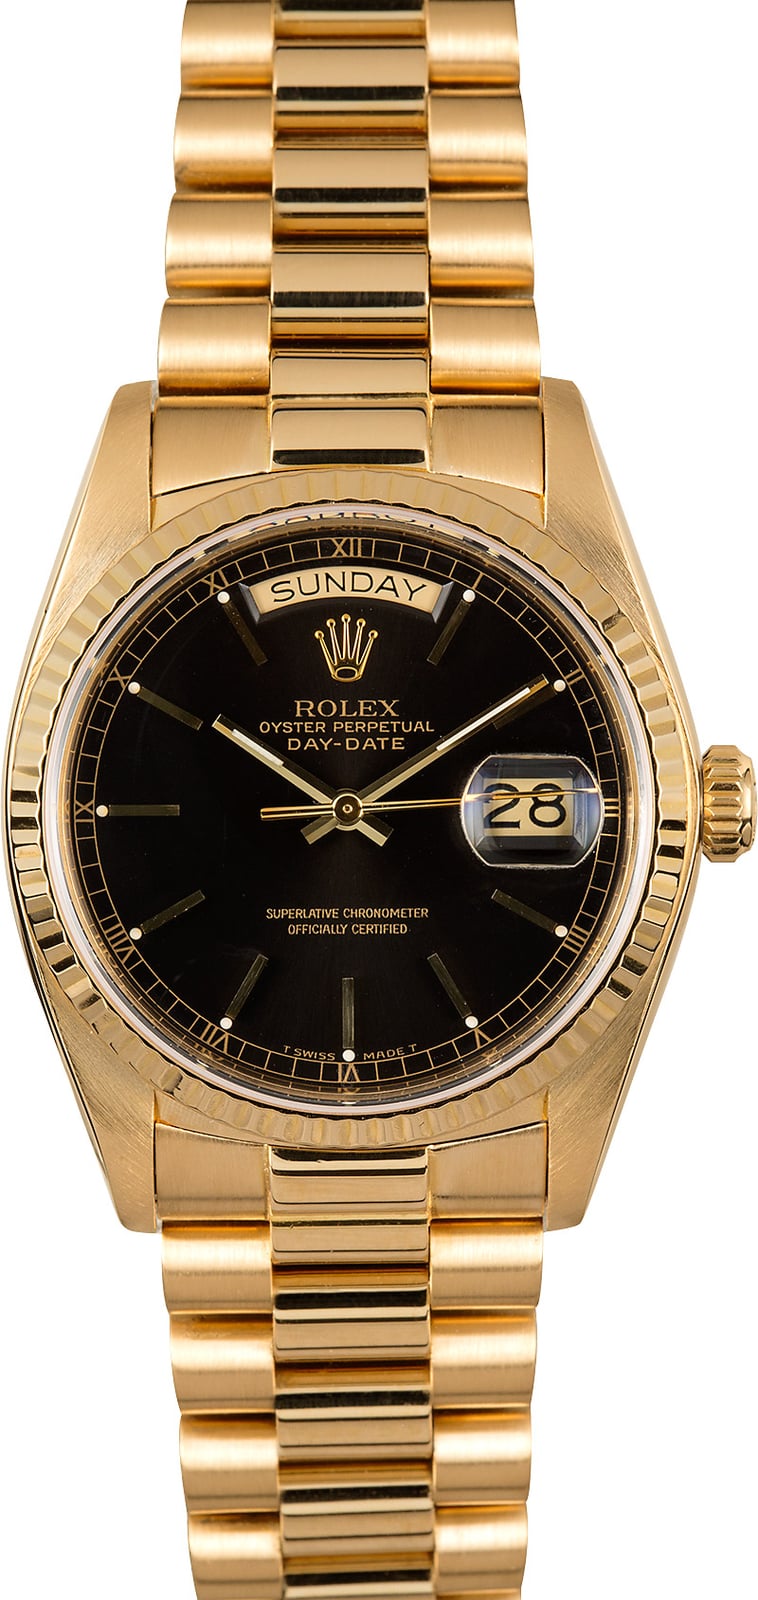 Rolex President Day-Date 18038 Black Dial